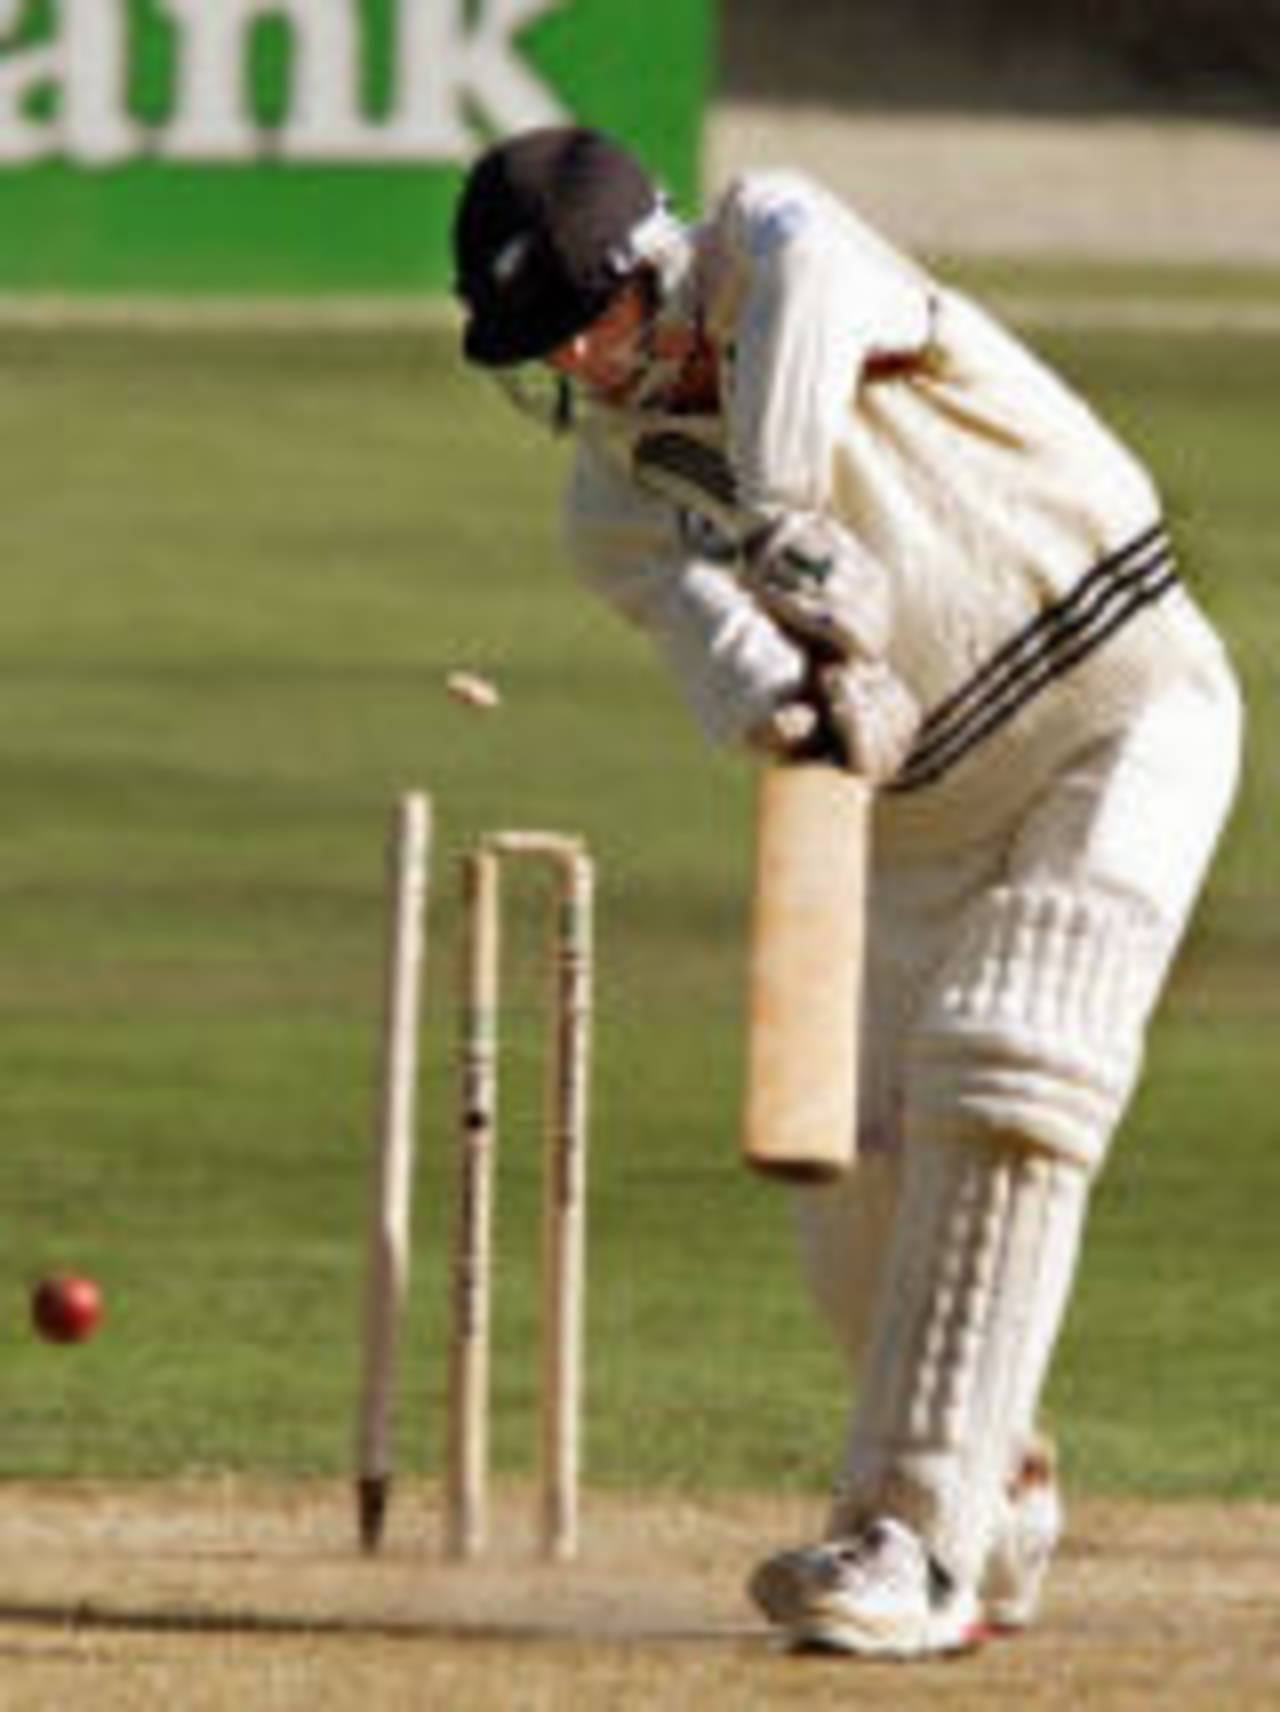 Chris Martin is bowled by Waqar Younis, day 2, 2nd Test at Christchurch, 15-19 March 2001.